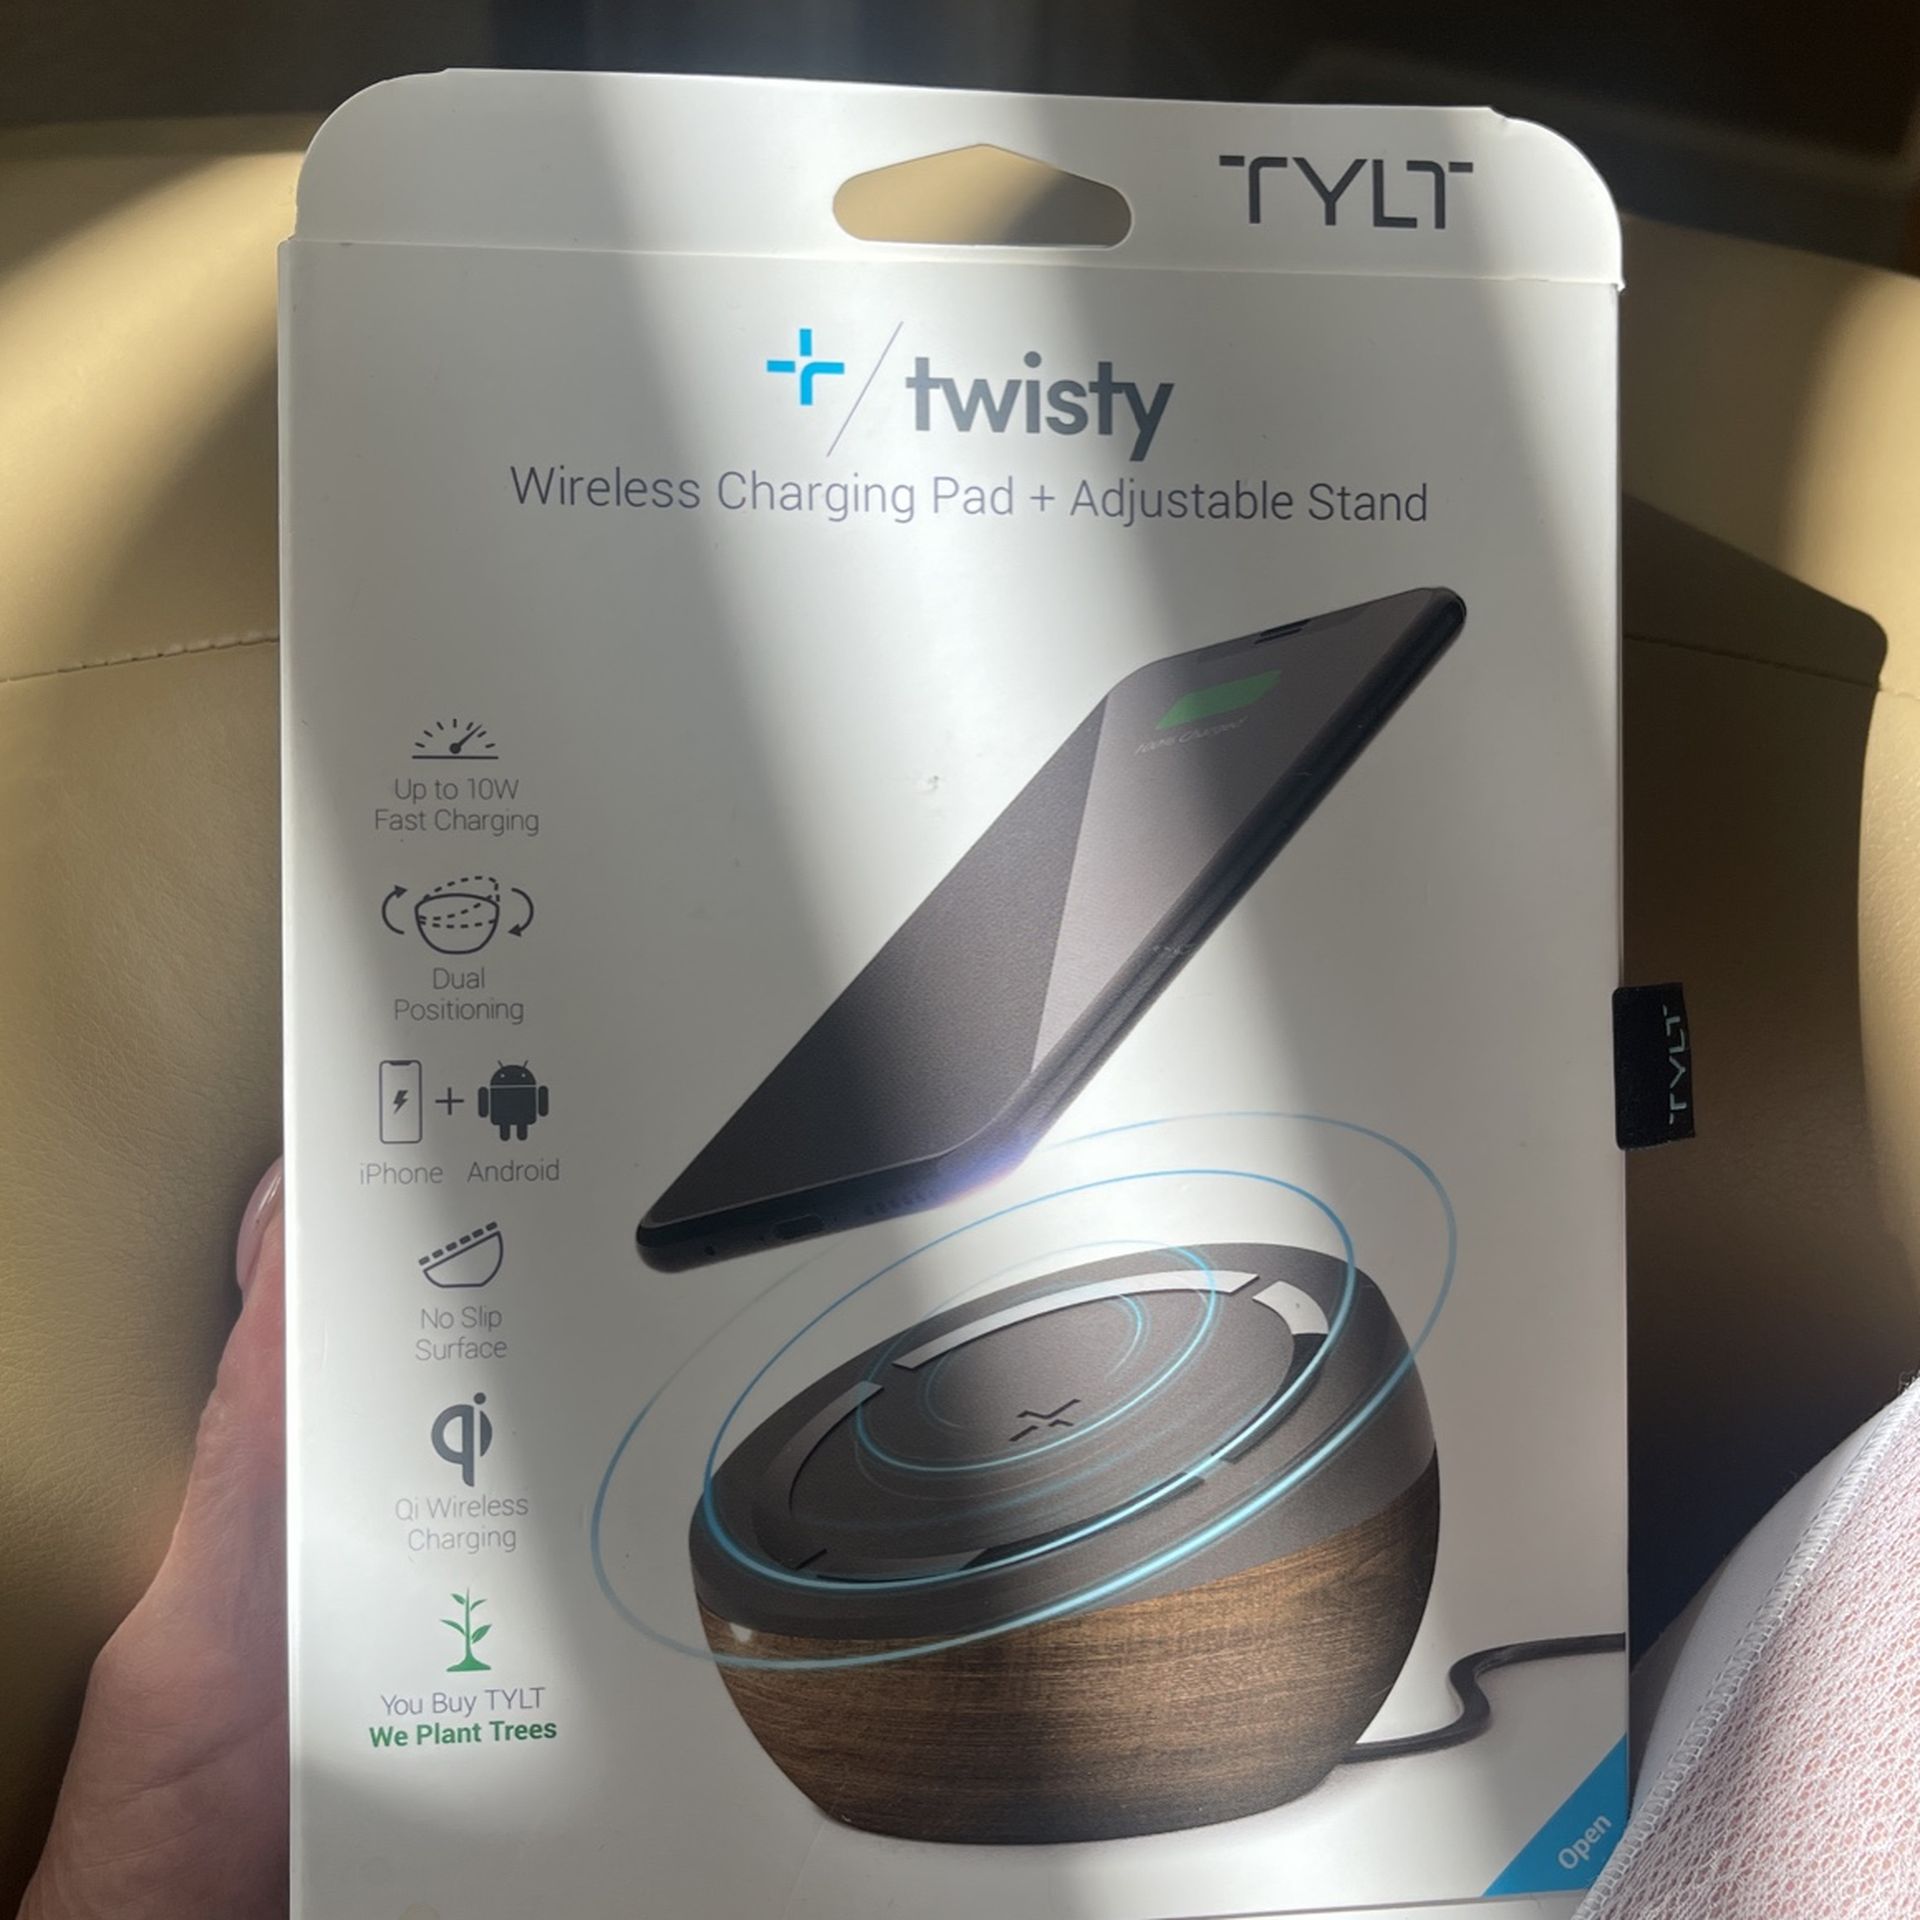 TYLT Twisty 10W Wireless Charging Pad and Adjustable Stand (Black), Qi-Certified Wireless Charger for iPhone X, iPhone 8/8 Plus, Samsung 9/S9+/S8/S8+/